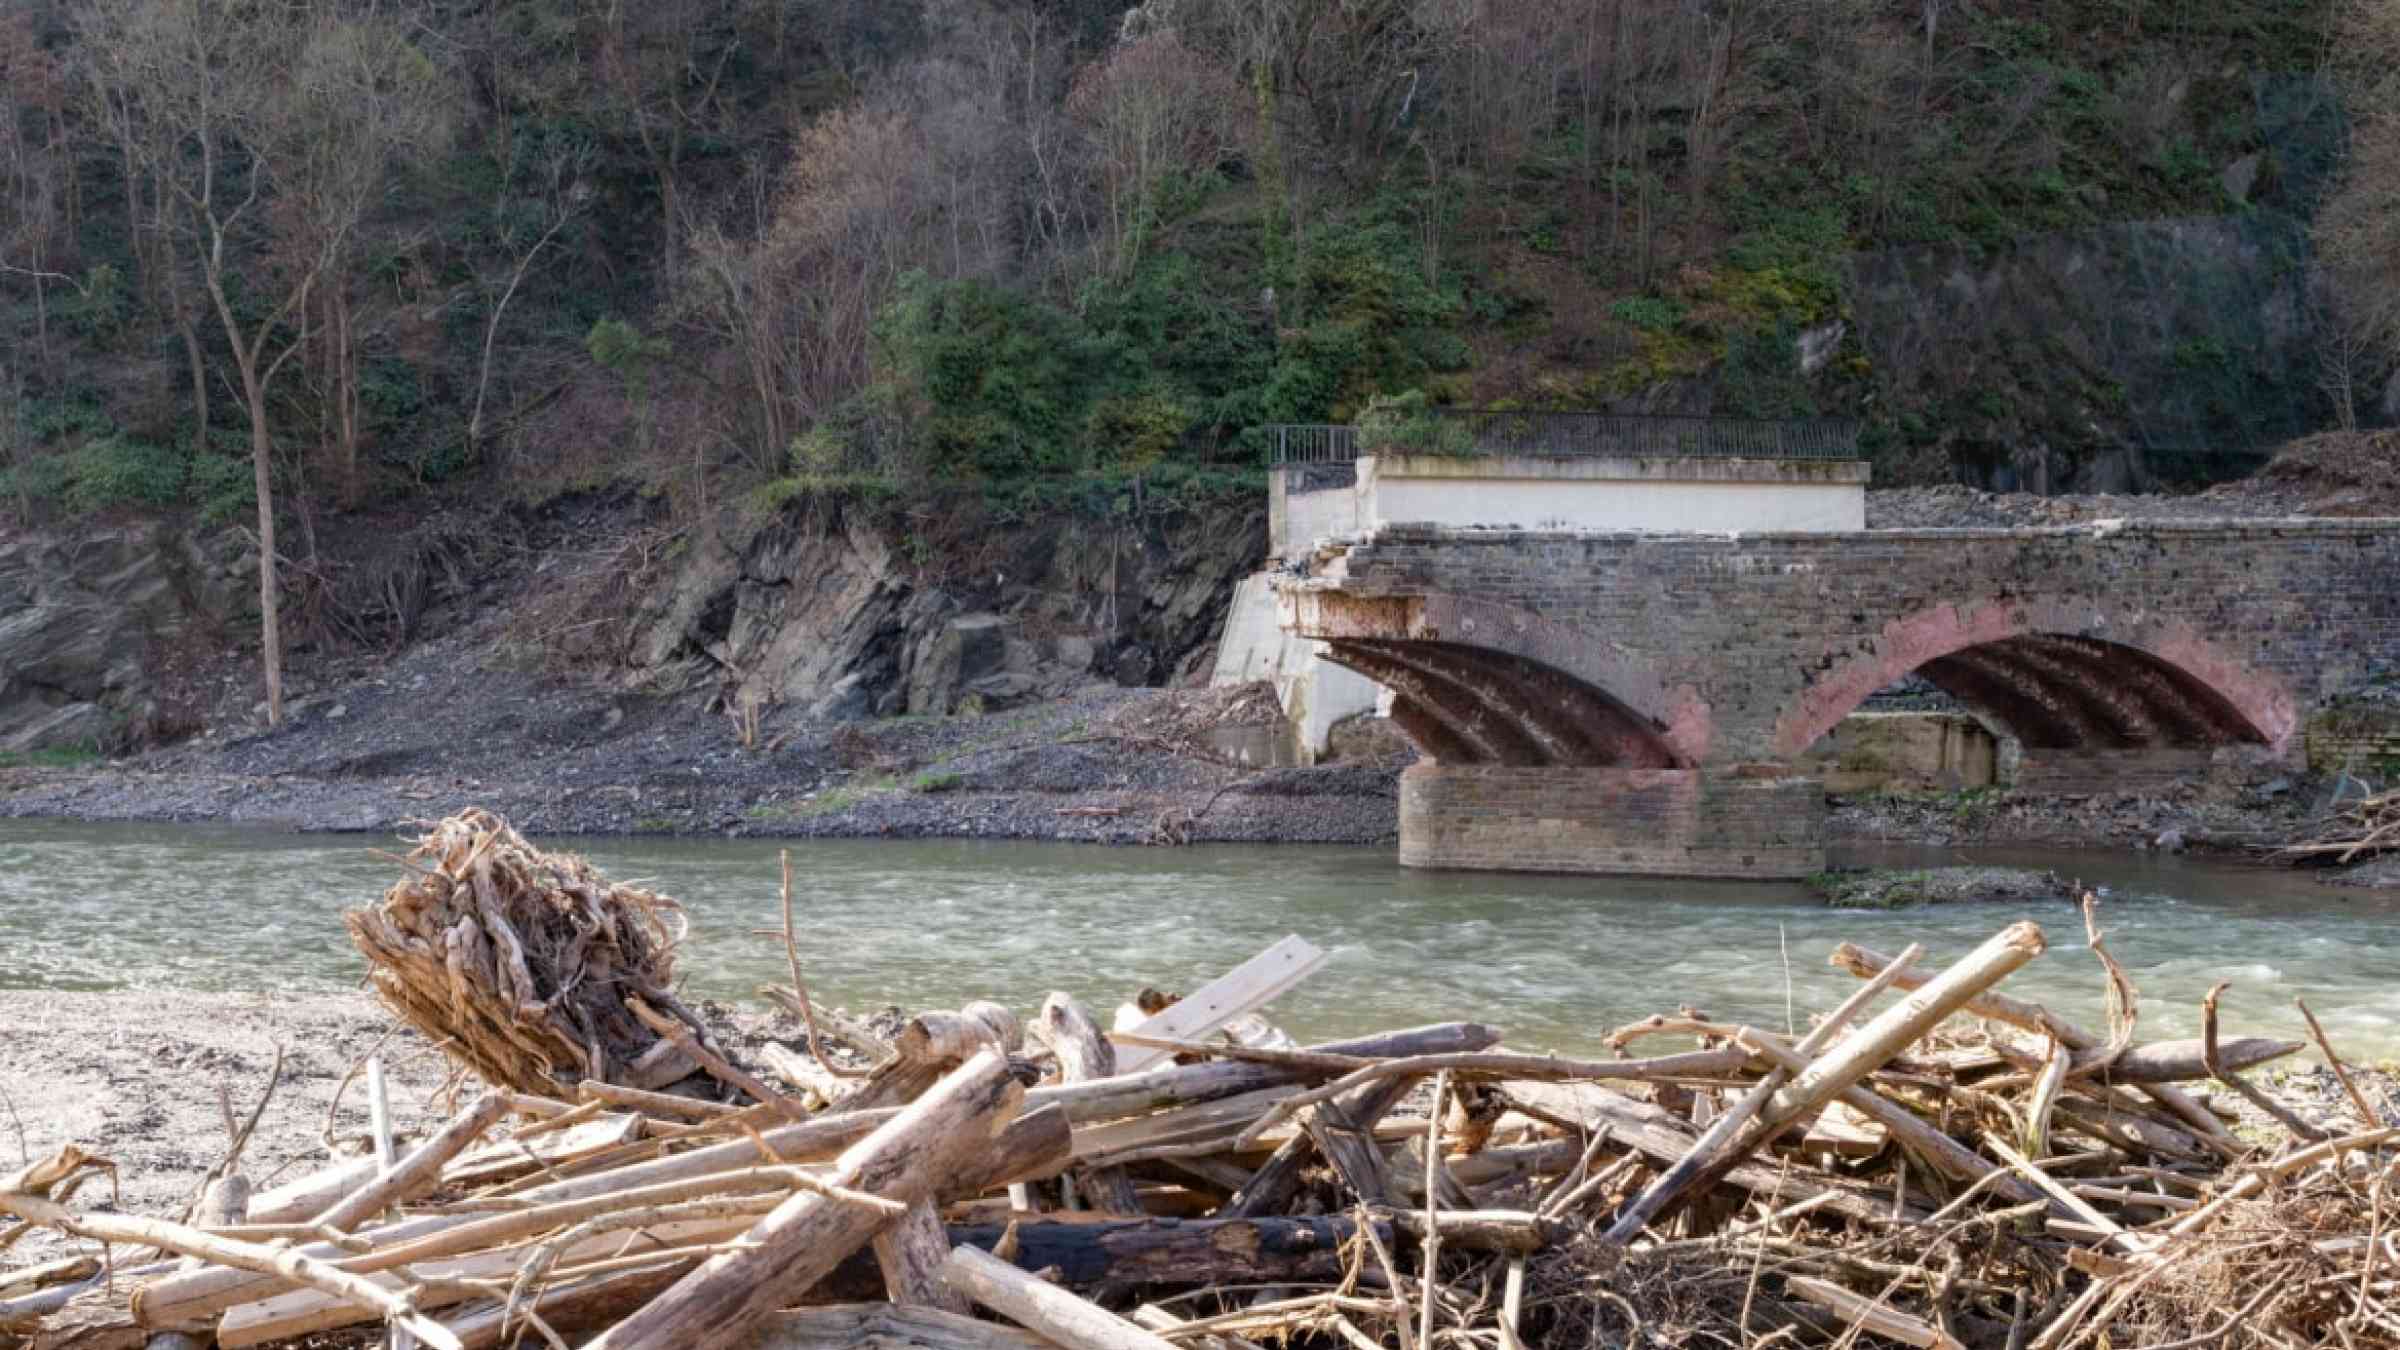 Damaged bridge after the floods in the Ahr valley in Germany in 2021.